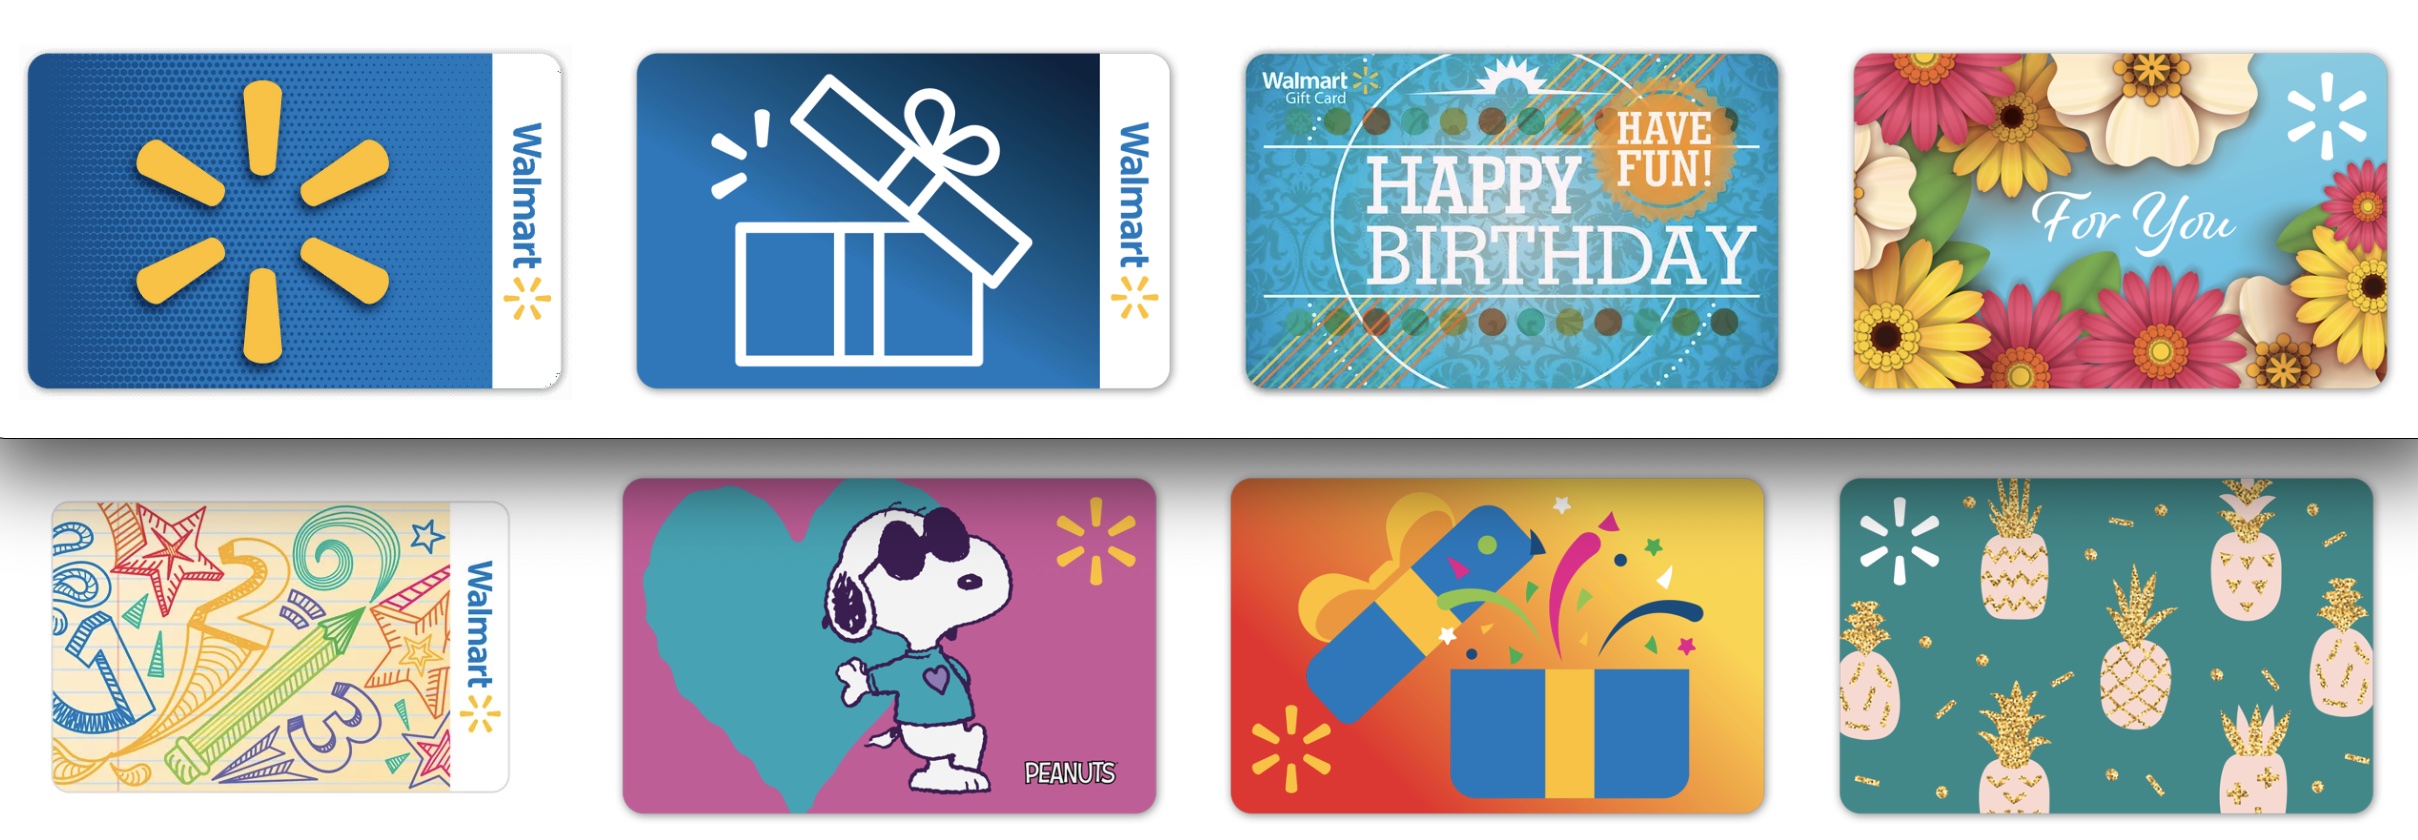 Can You Buy Gift Cards With a Walmart Gift Card?